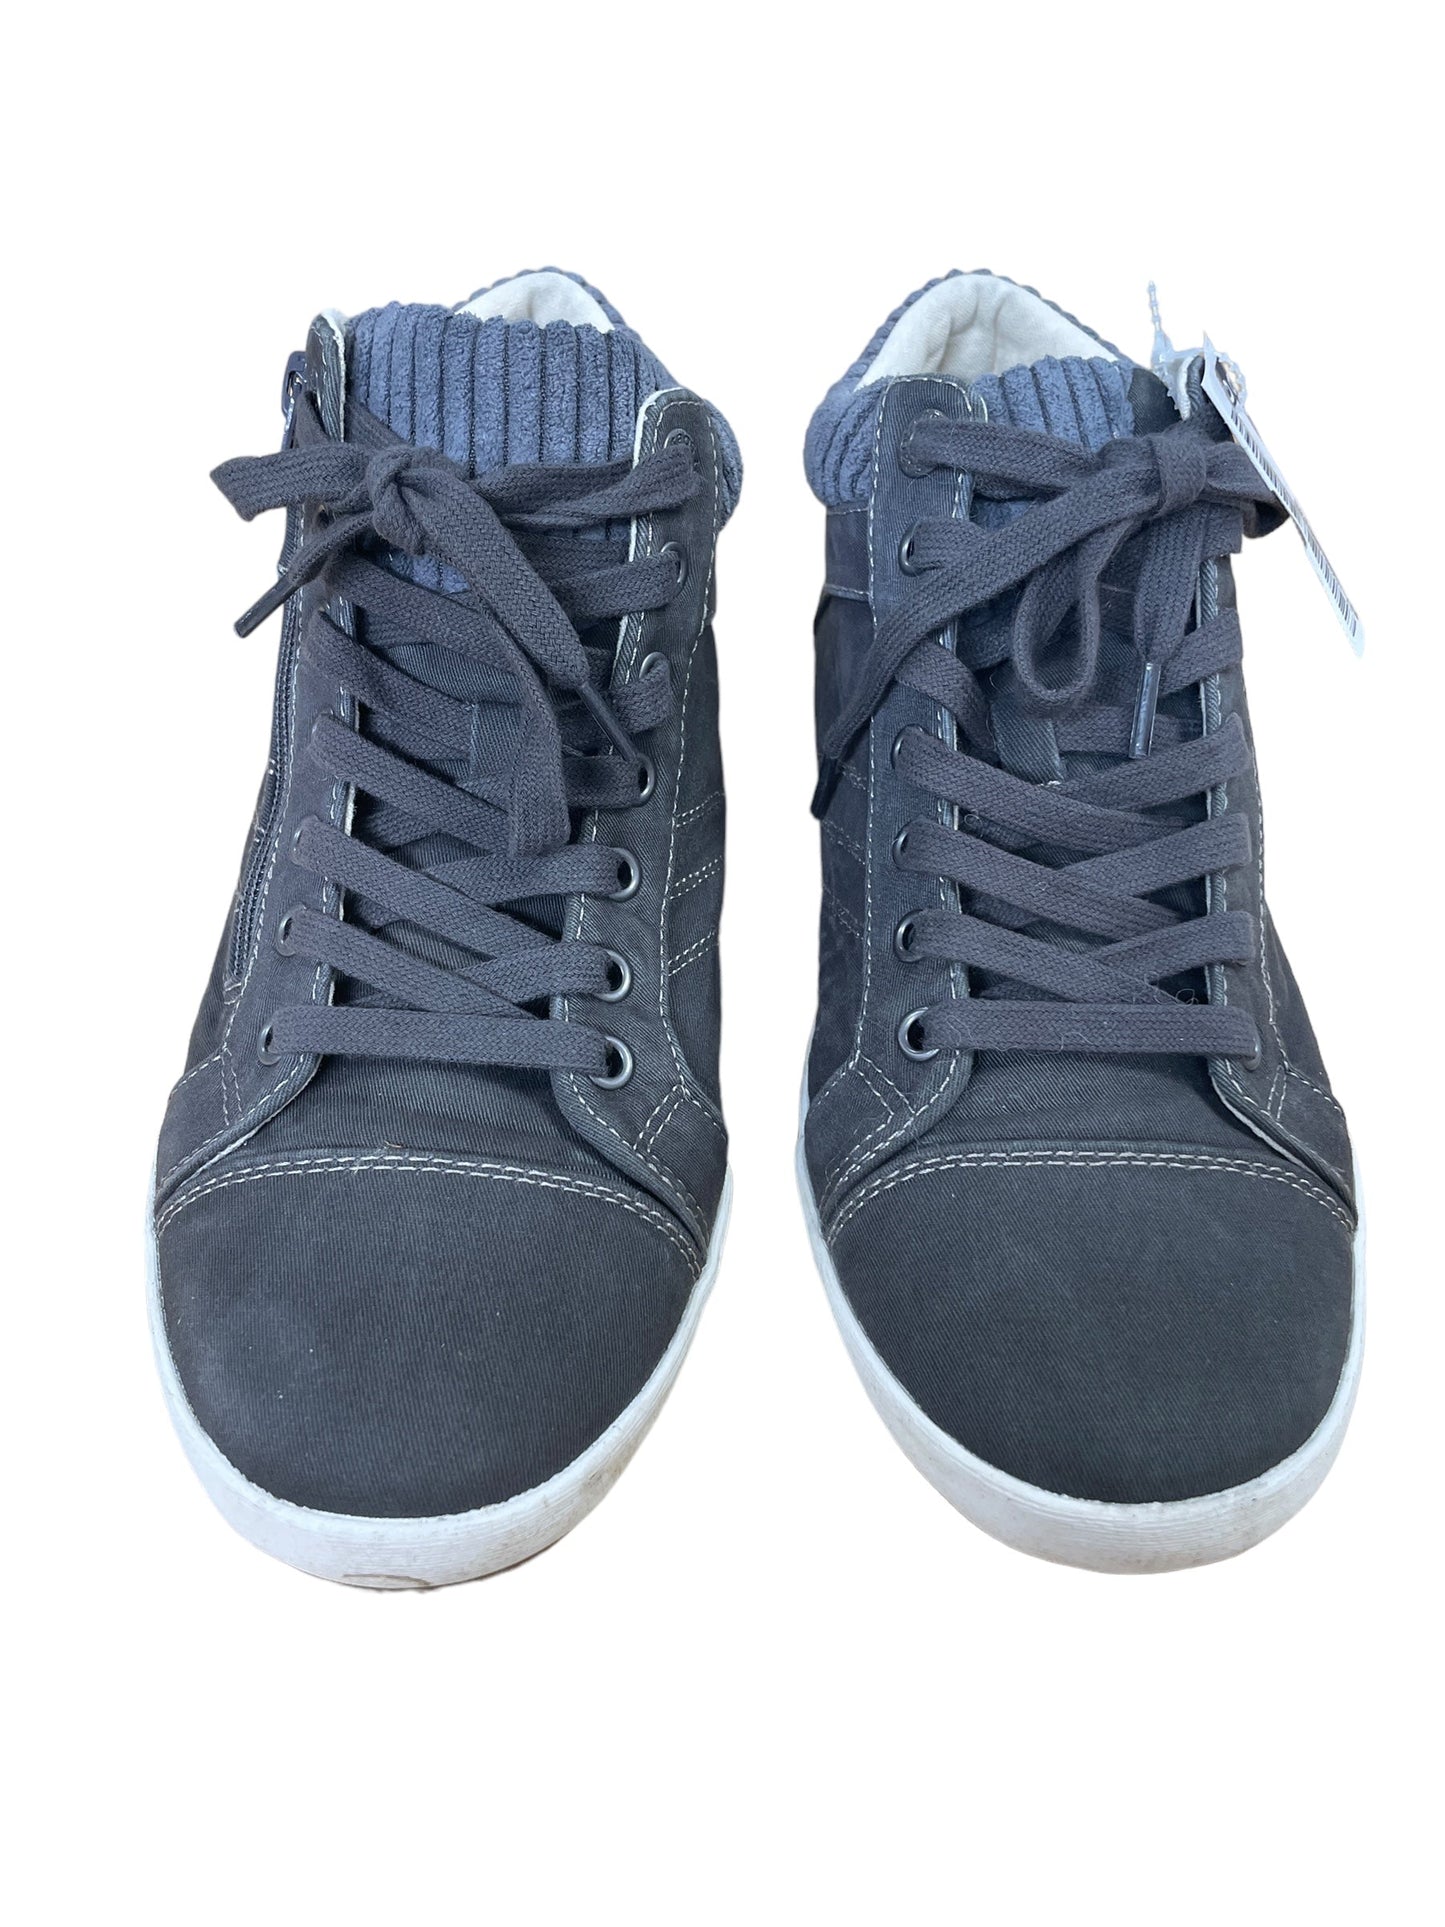 Grey Shoes Sneakers Taos, Size 9.5